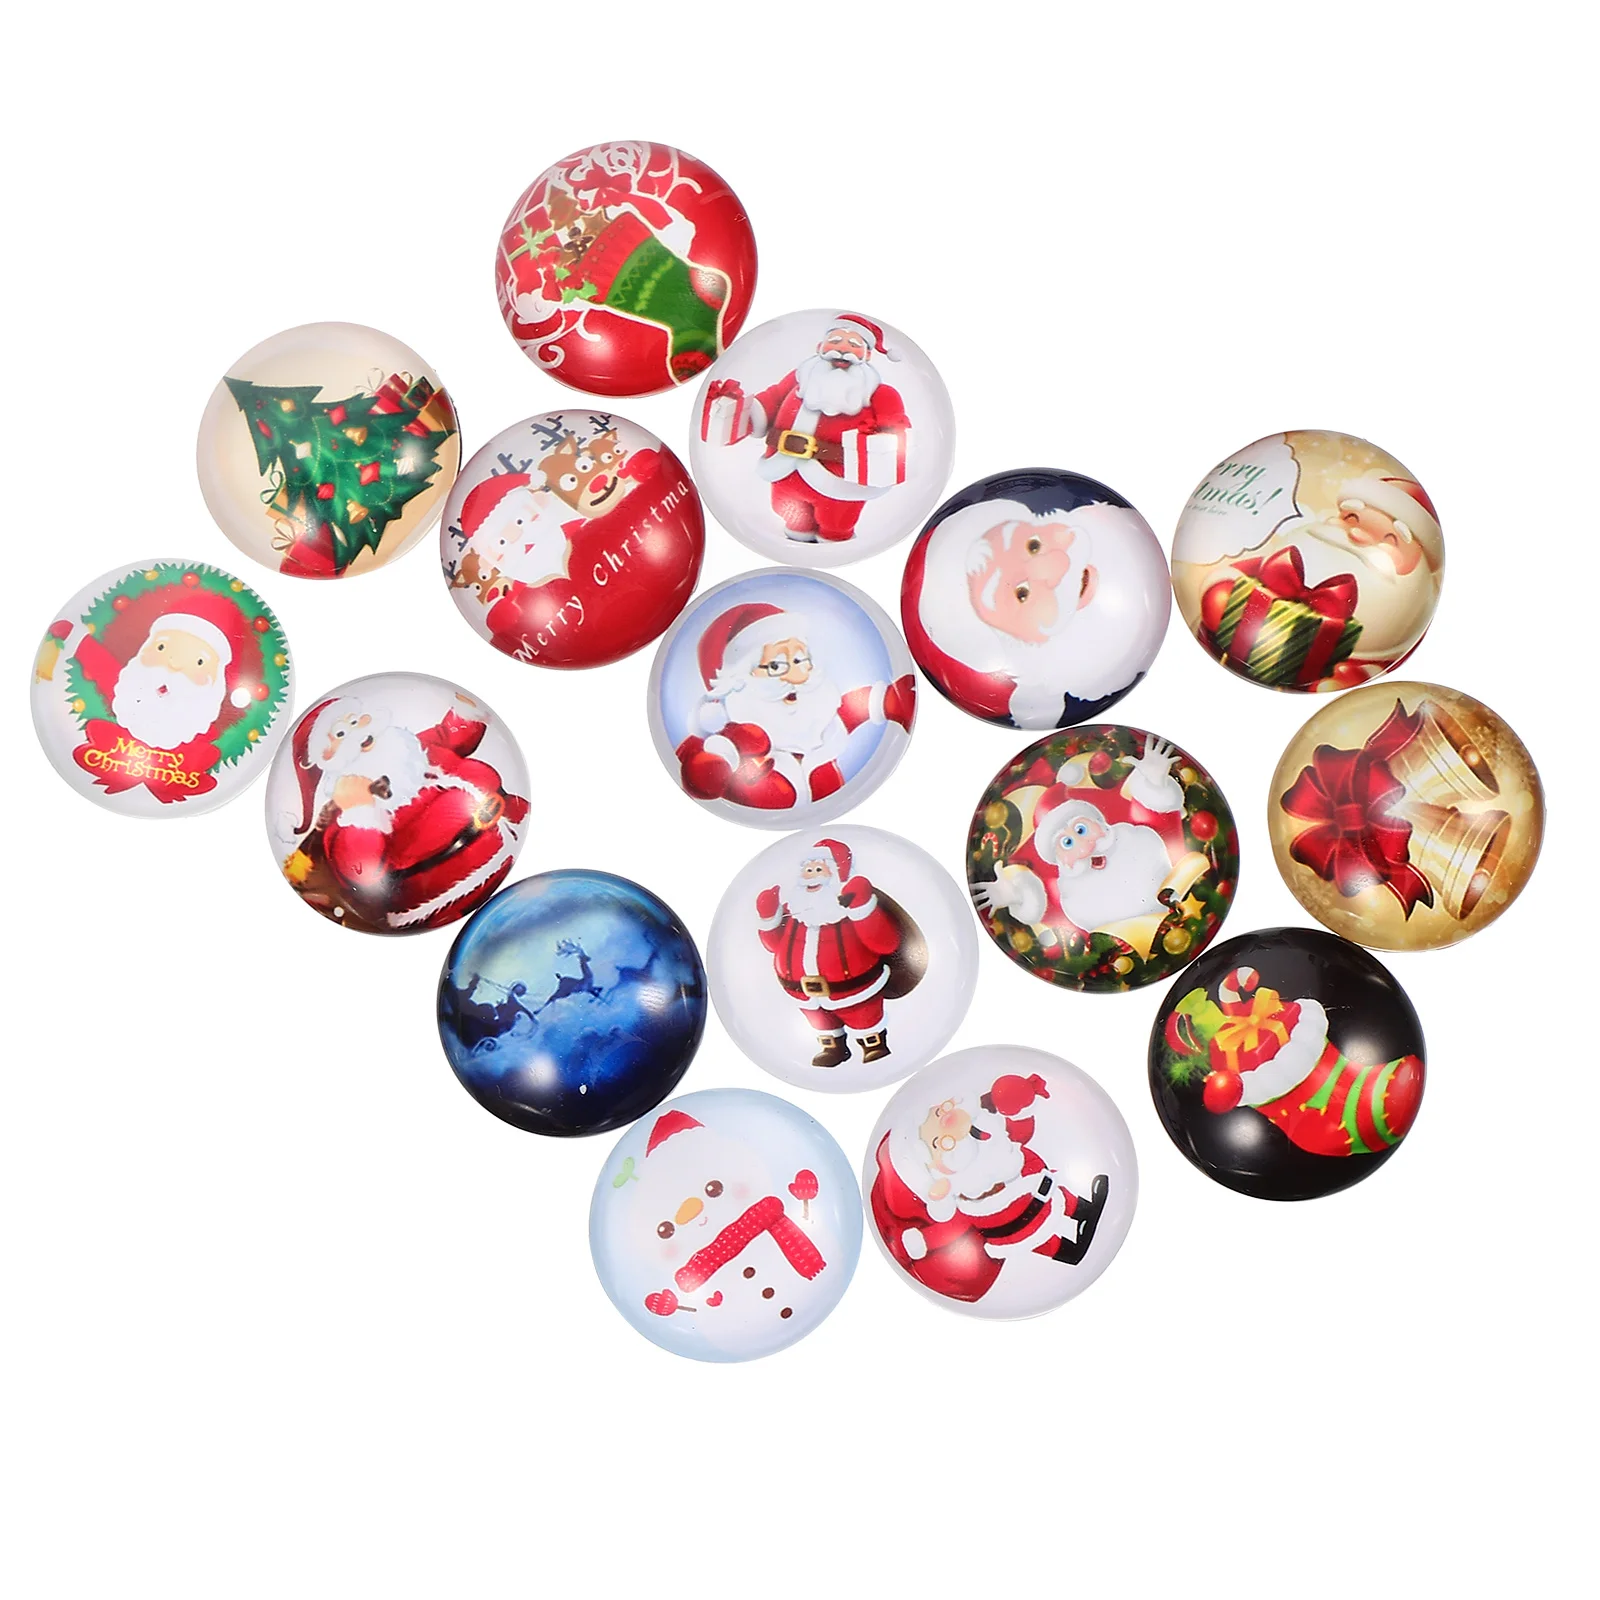 

16 Pcs Christmas Fridge Magnets Refrigerator Gift Three-dimensional Gifts Kitchen Accessories